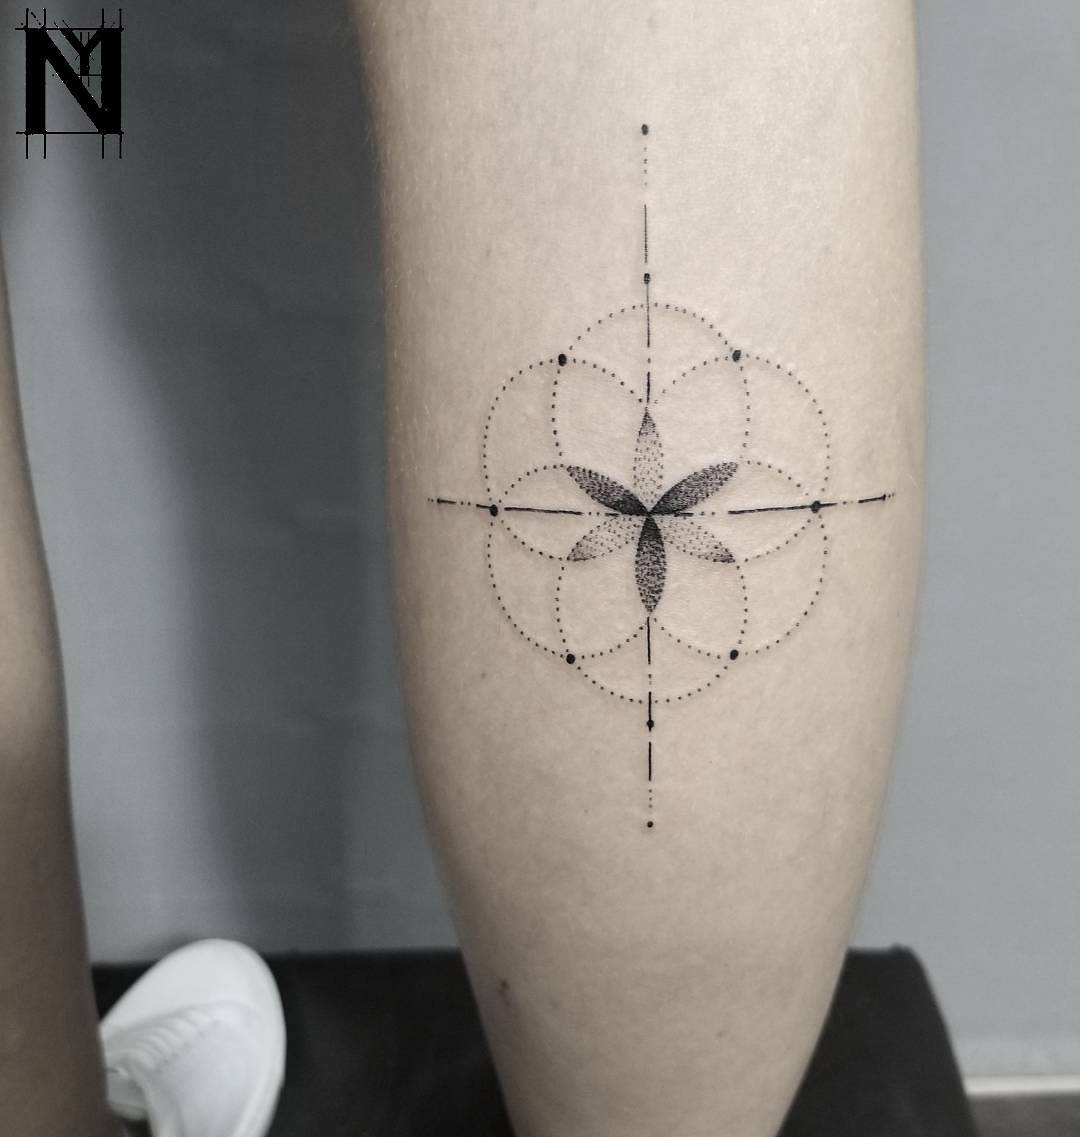 Seed of life tattoo on the calf